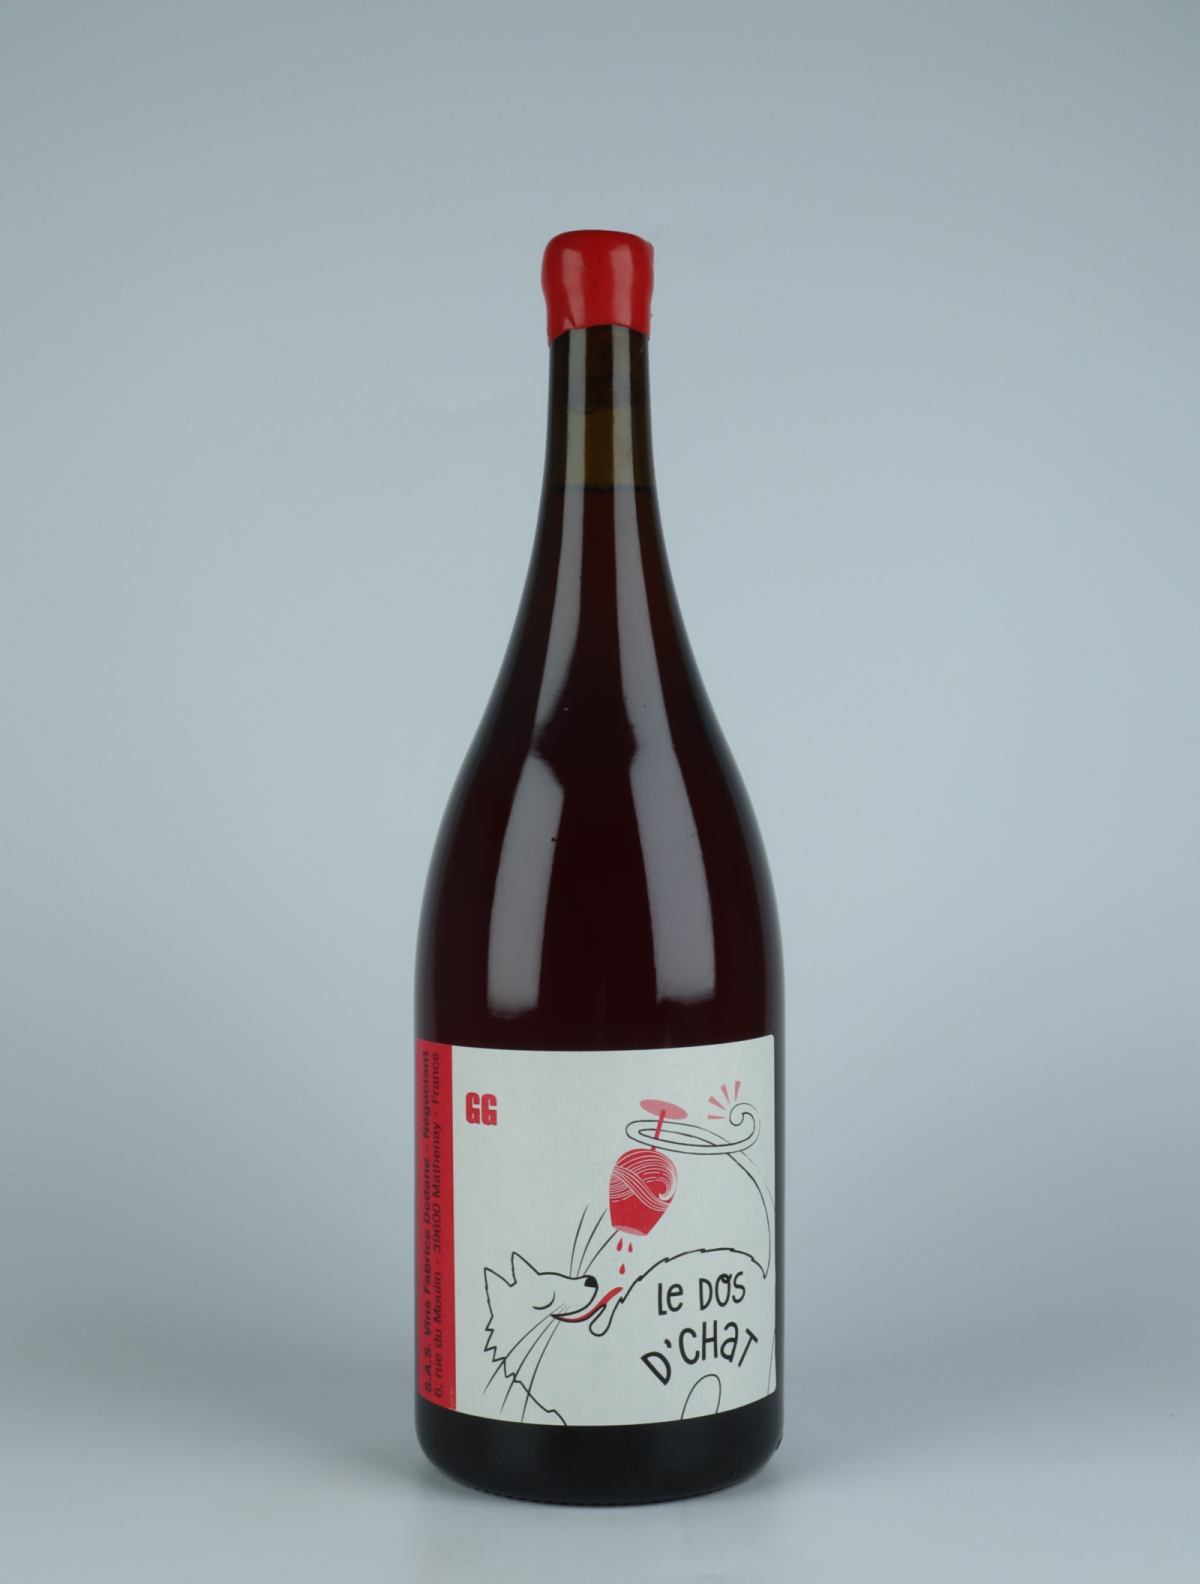 A bottle 2021 G.G. Rouge - Magnum Red wine from Fabrice Dodane, Jura in France